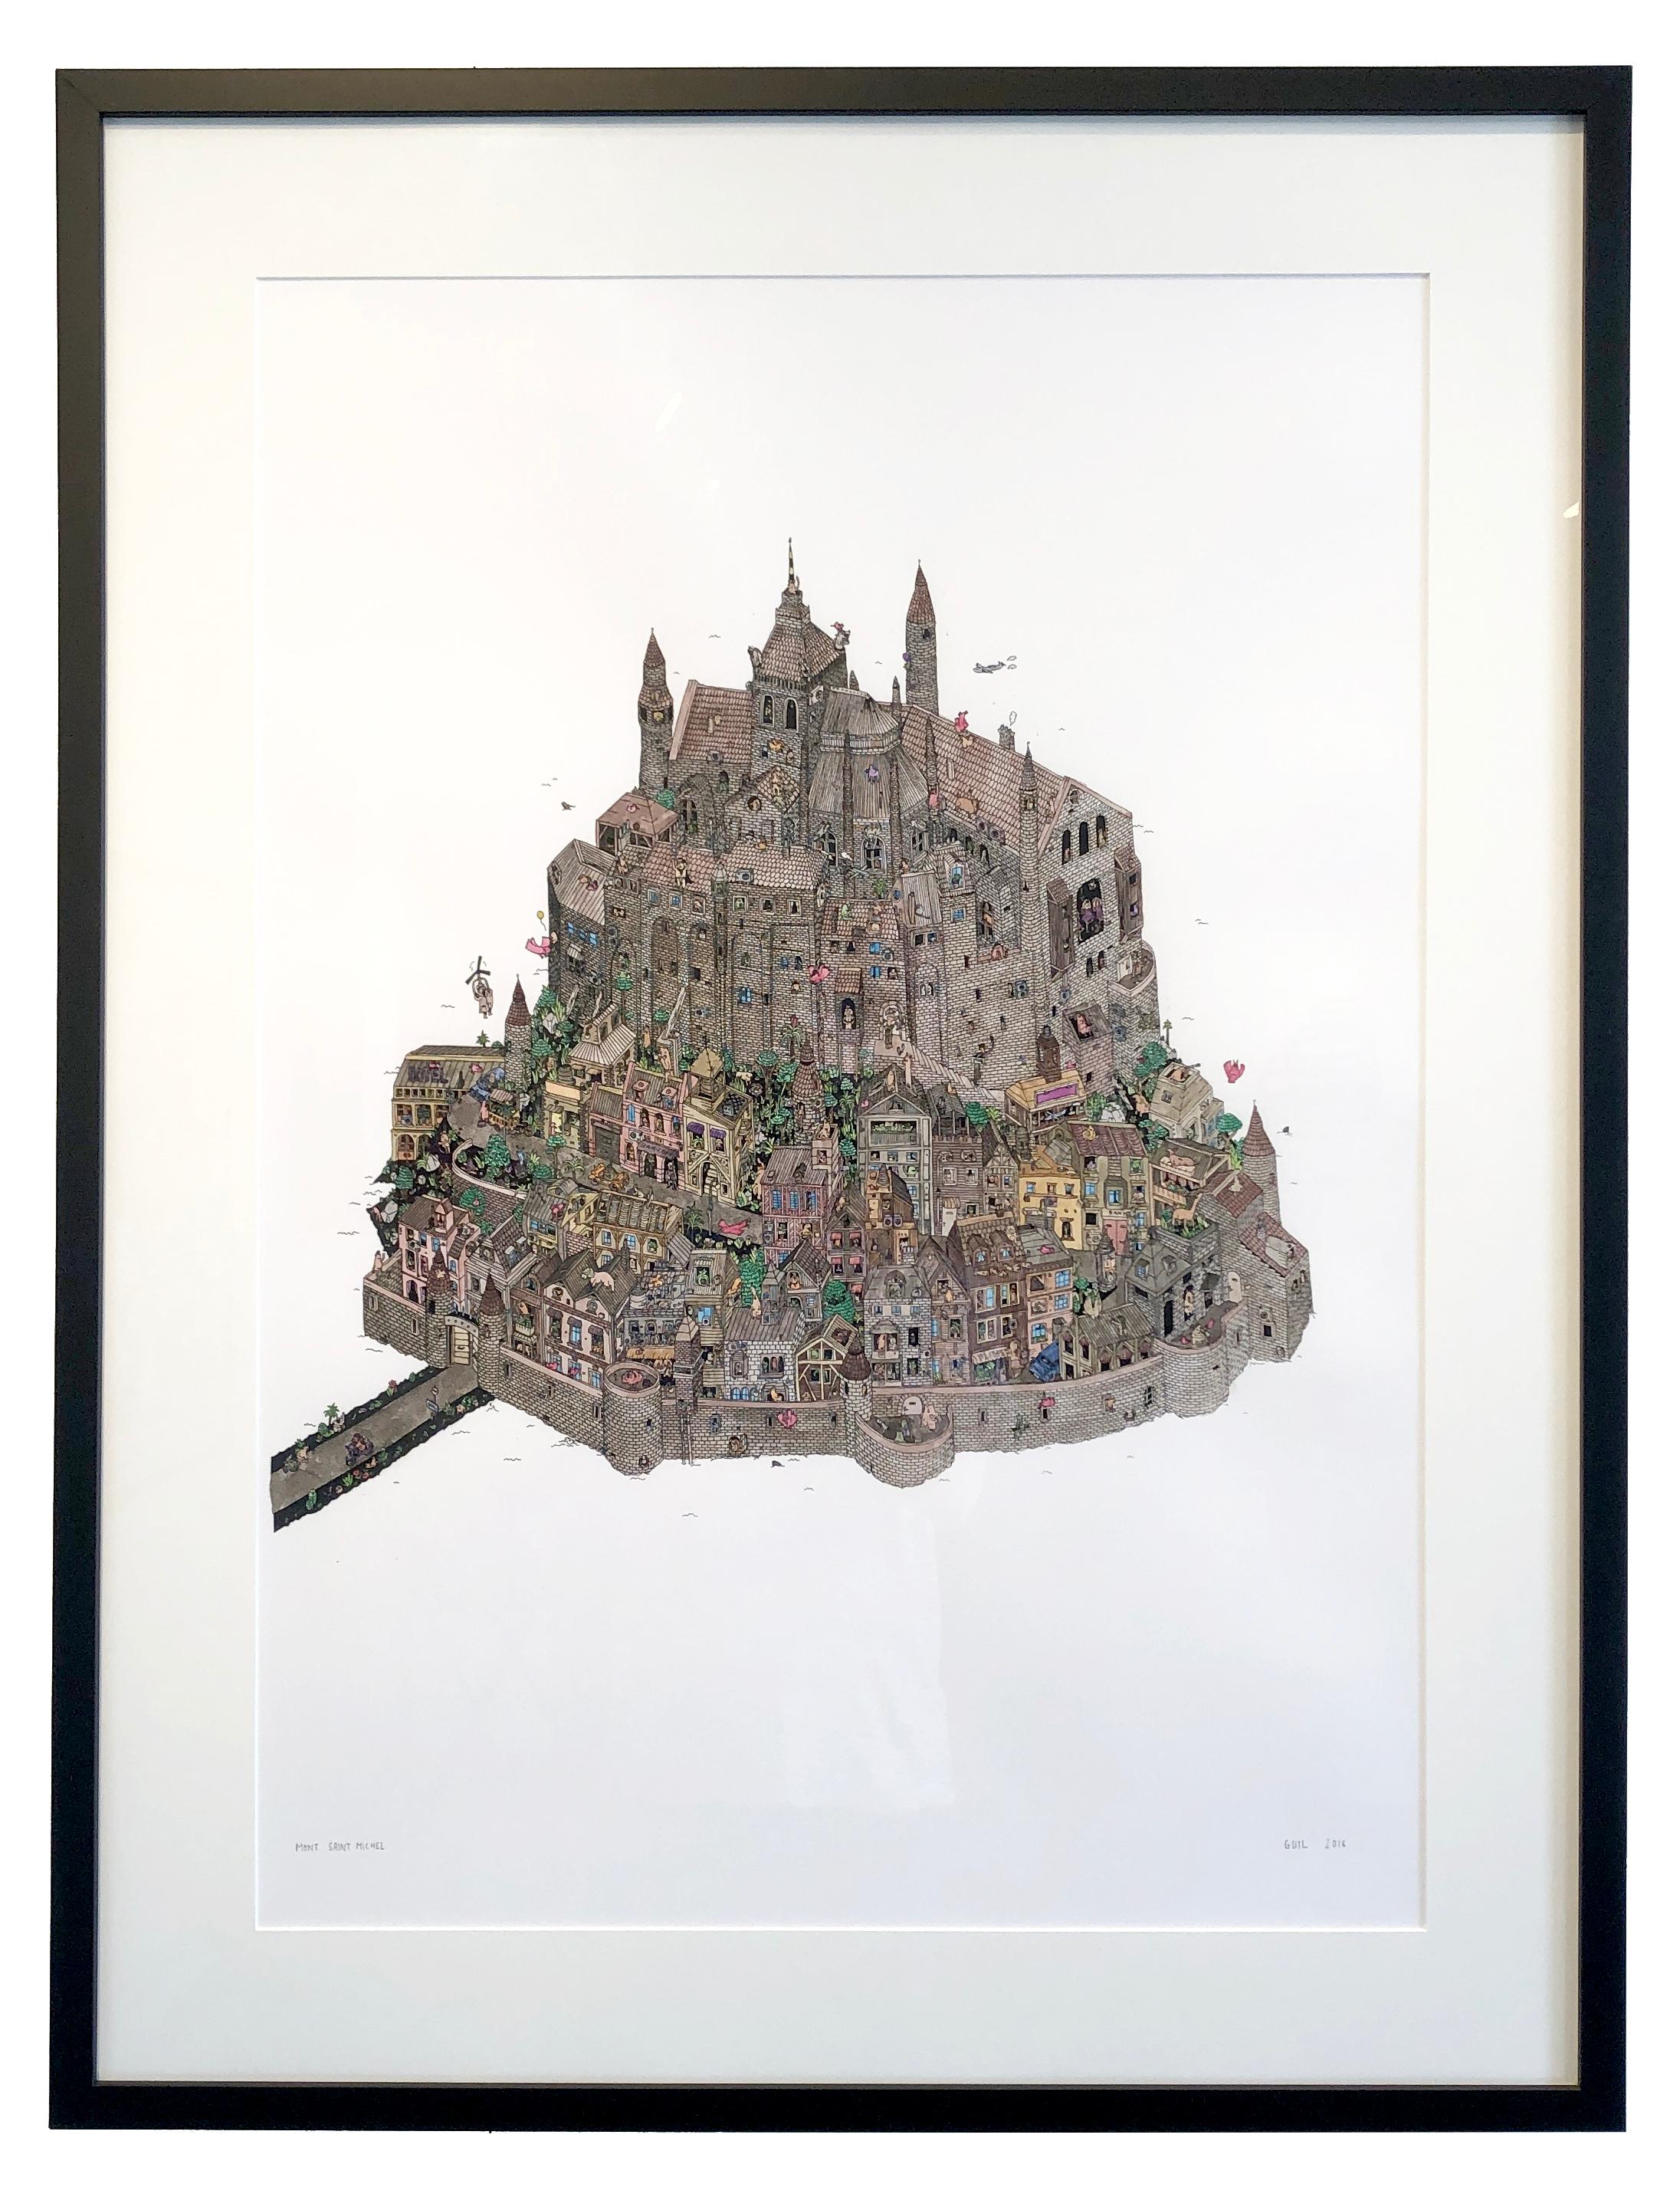 This beautiful intricate, hand colored illustration made using fine calligraphy pens to crate the black outline, then Cornet makes 5 lithograph prints, each one is colored differently using markers or in this piece watercolor. This piece is framed